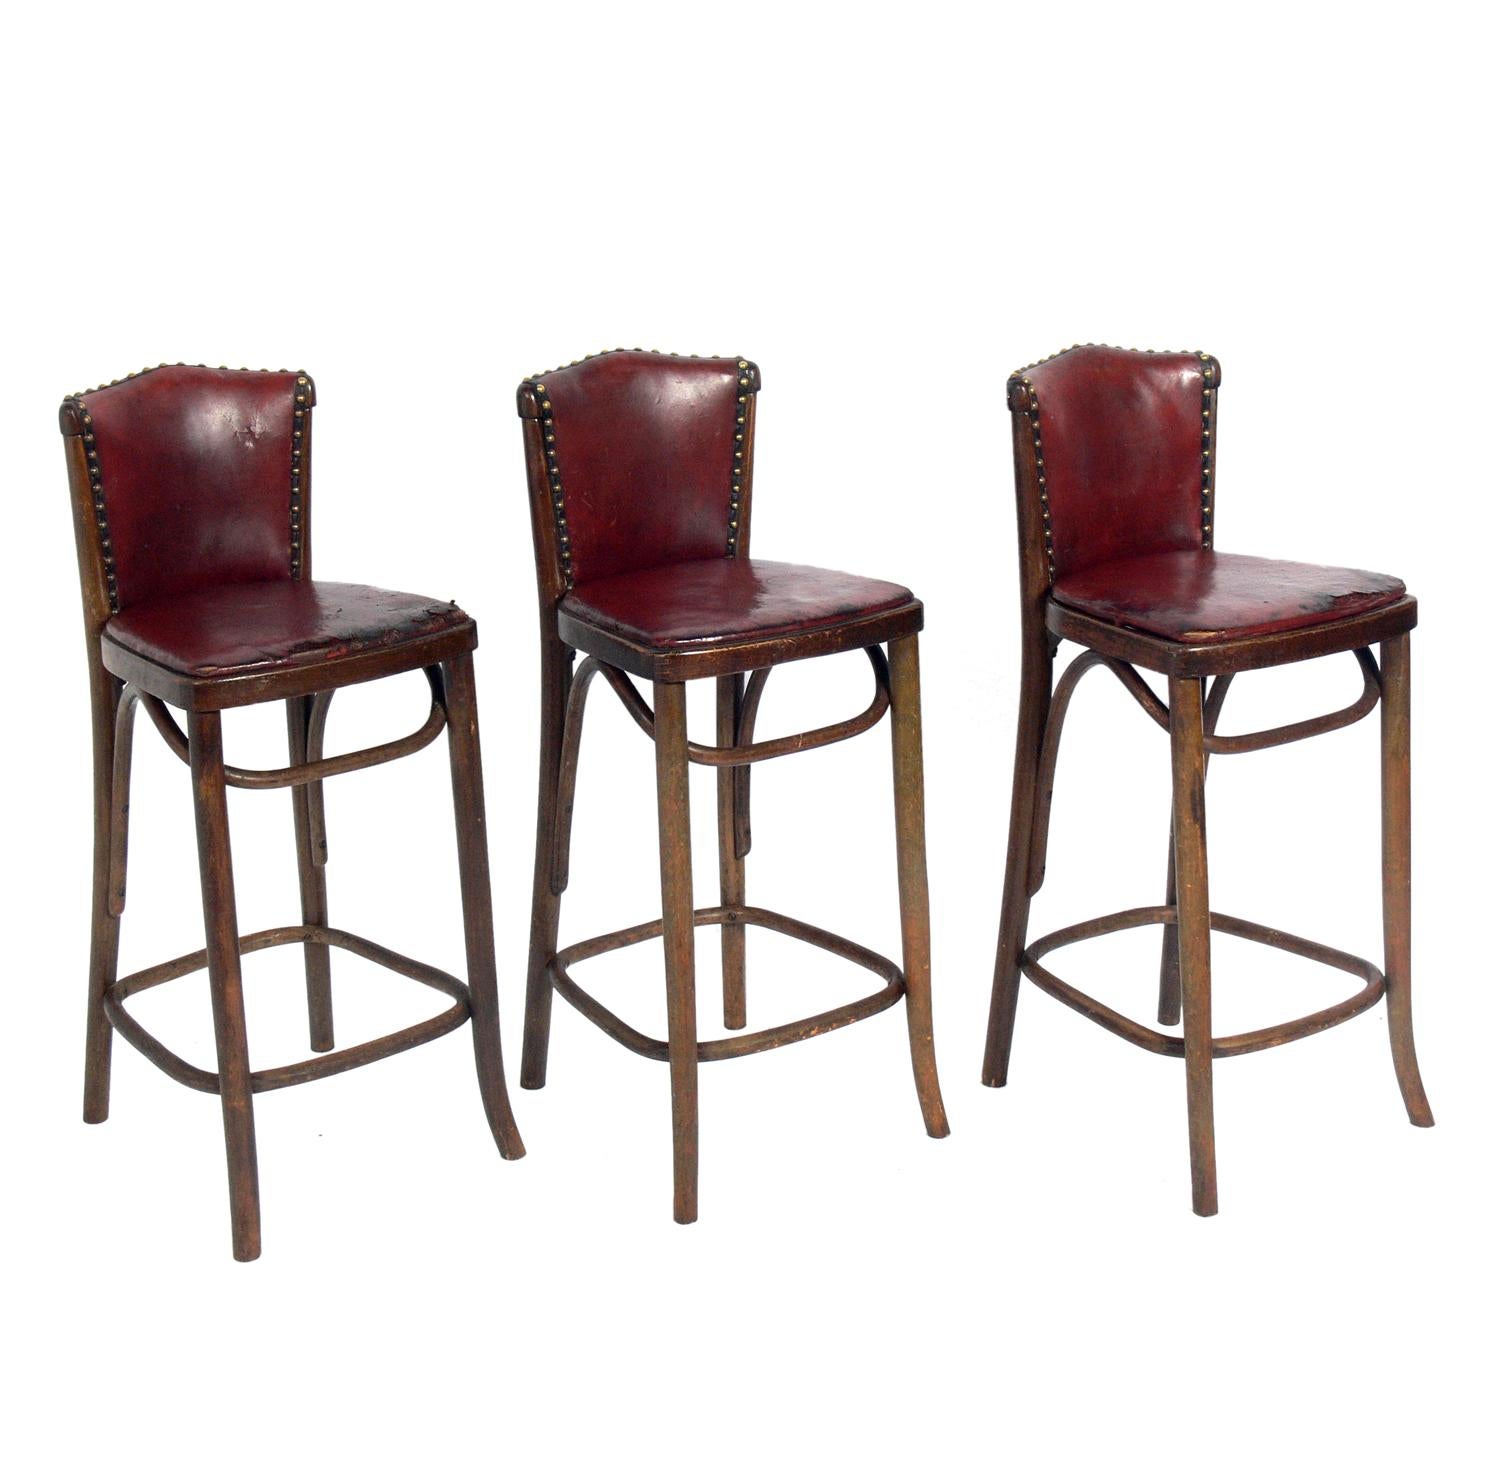 Set of Bentwood Bar Stools, circa 1930s. They retain their original cognac leather upholstery with brass nailhead trim. These stools show a lot of distressed patina and wear, especially at the front of the seats, where some of the leather is missing